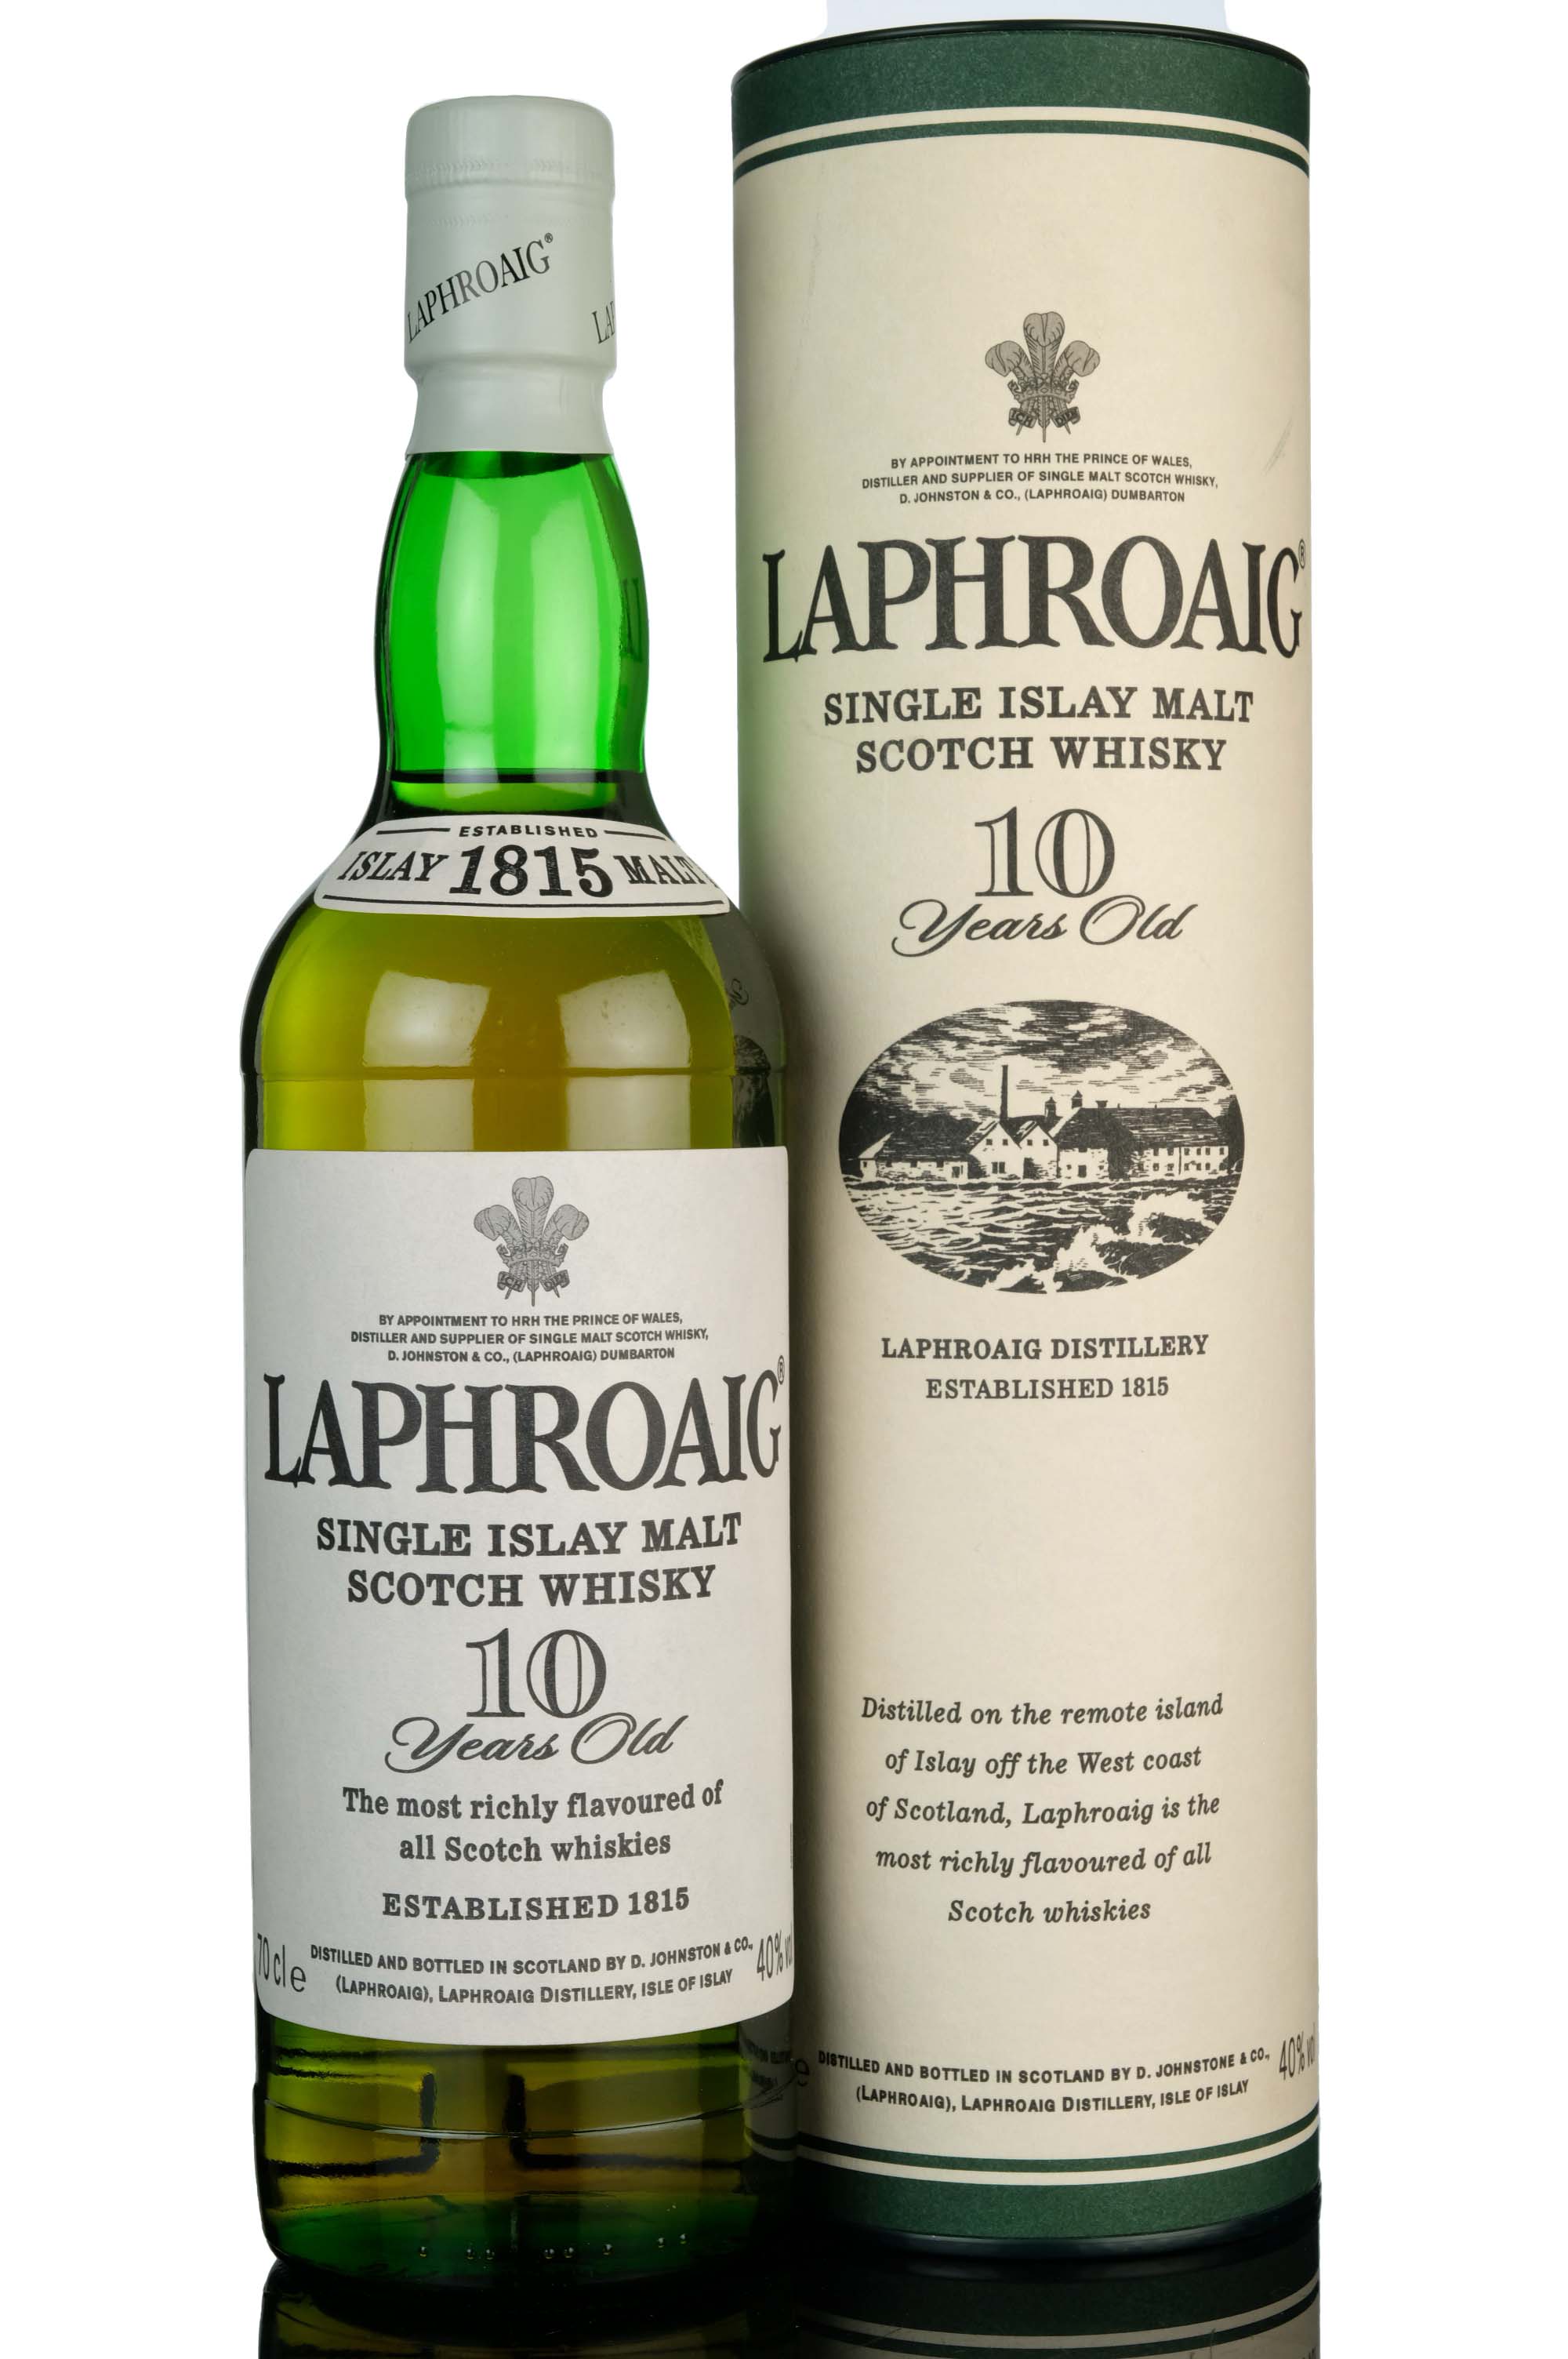 Laphroaig 10 Year Old - Early 2000s